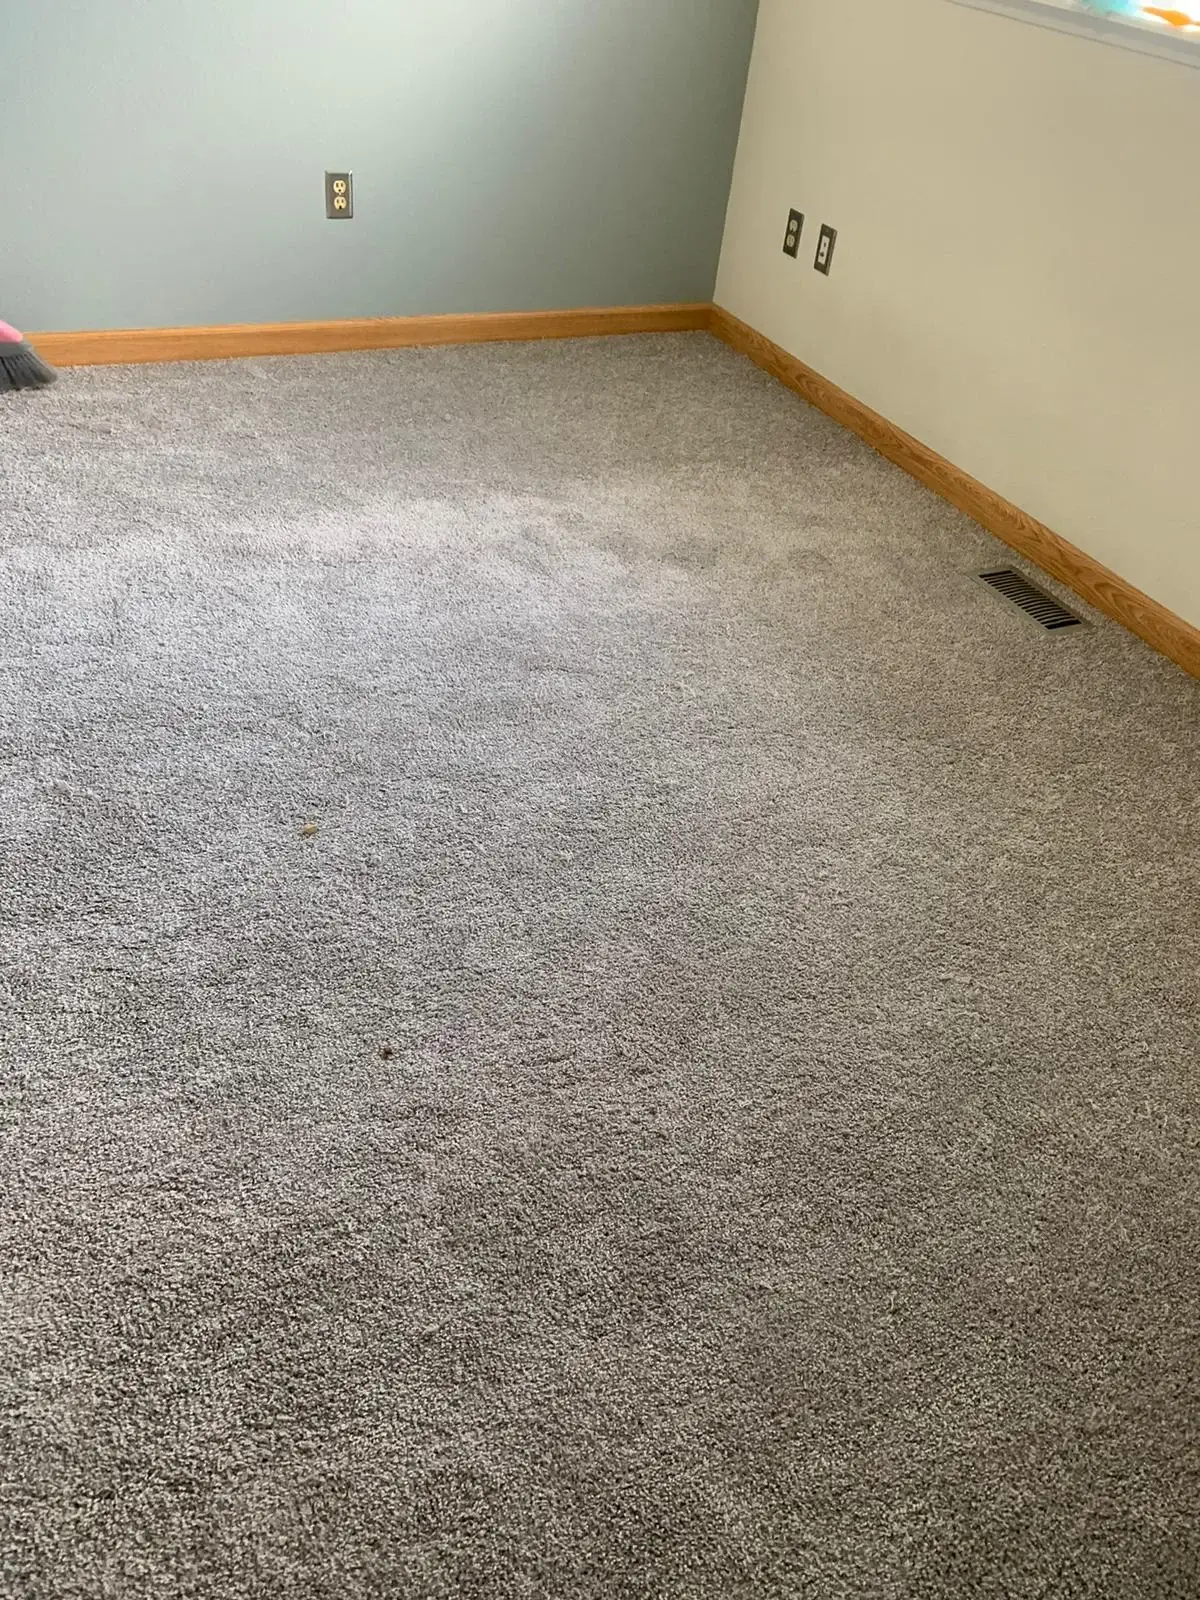 Image showing a floor with a good carpet installation by Leo's flooring